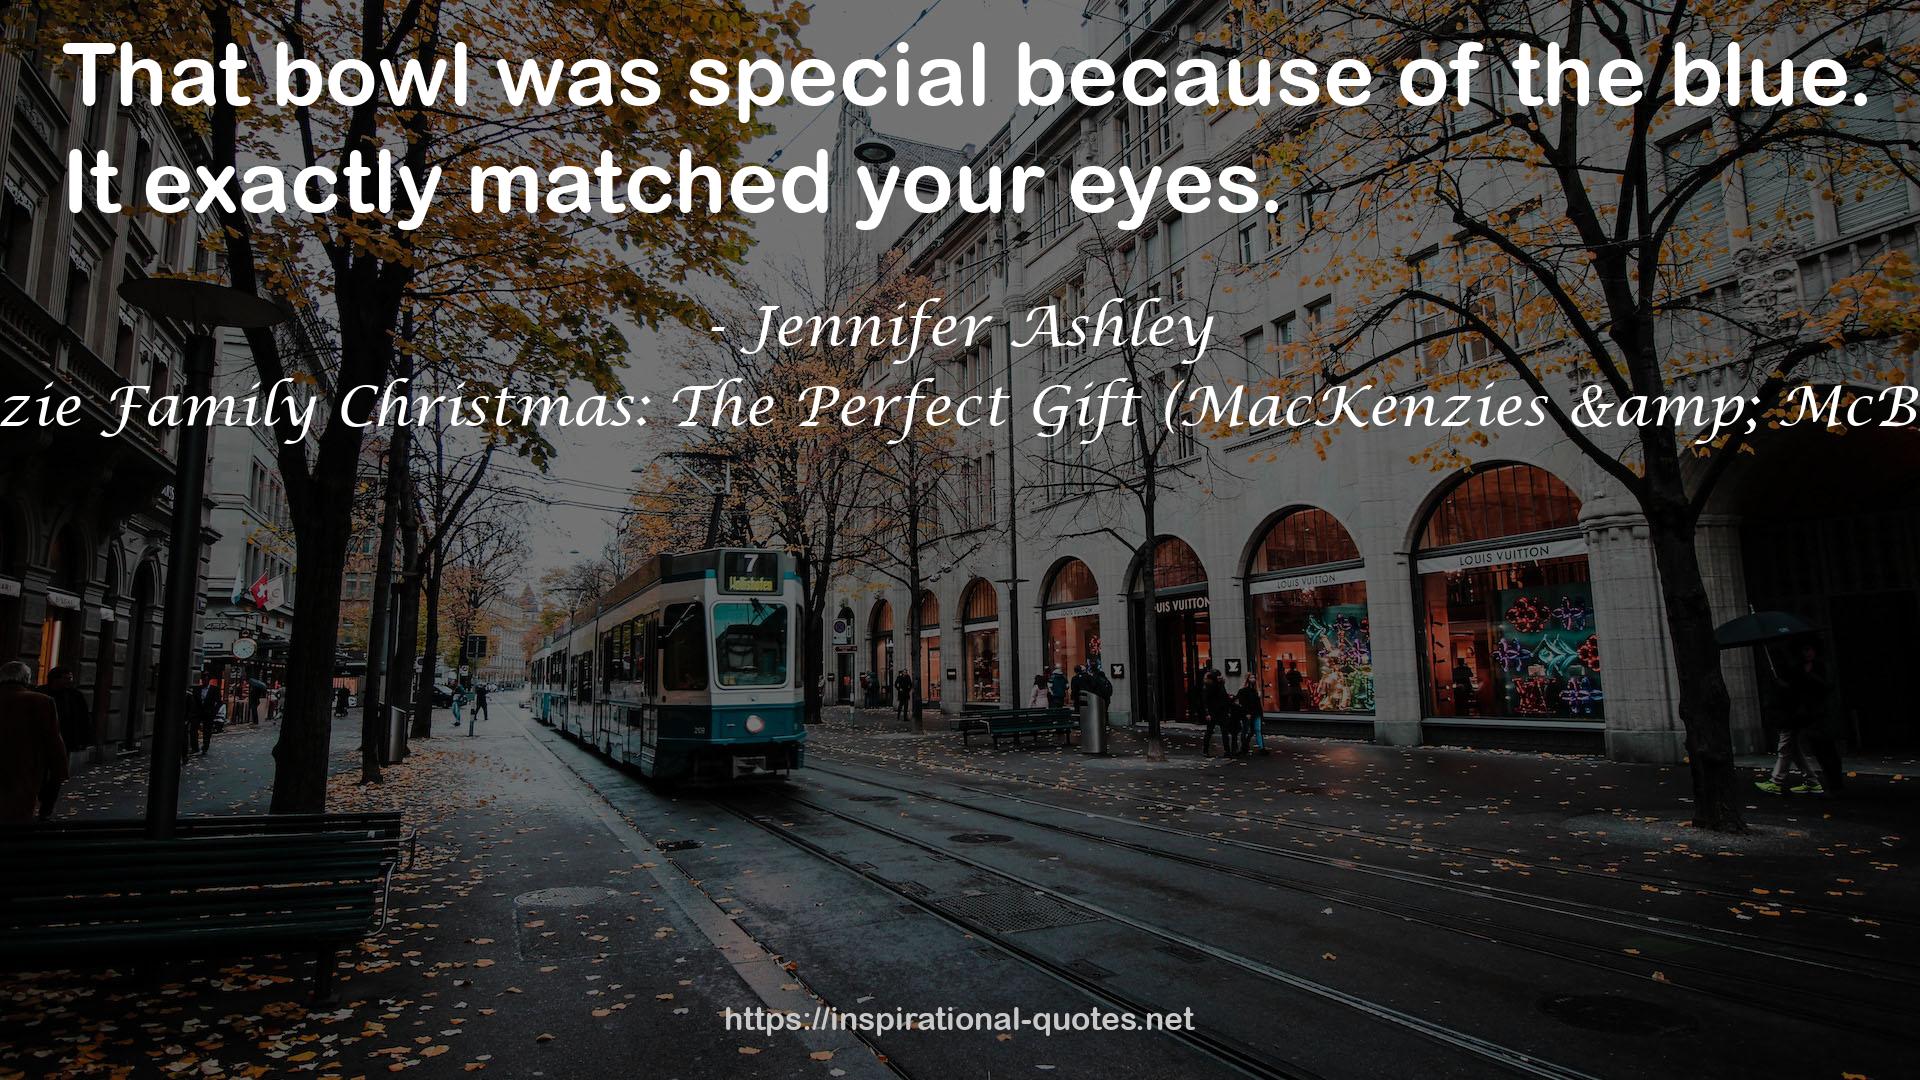 A Mackenzie Family Christmas: The Perfect Gift (MacKenzies & McBrides, #4.5) QUOTES